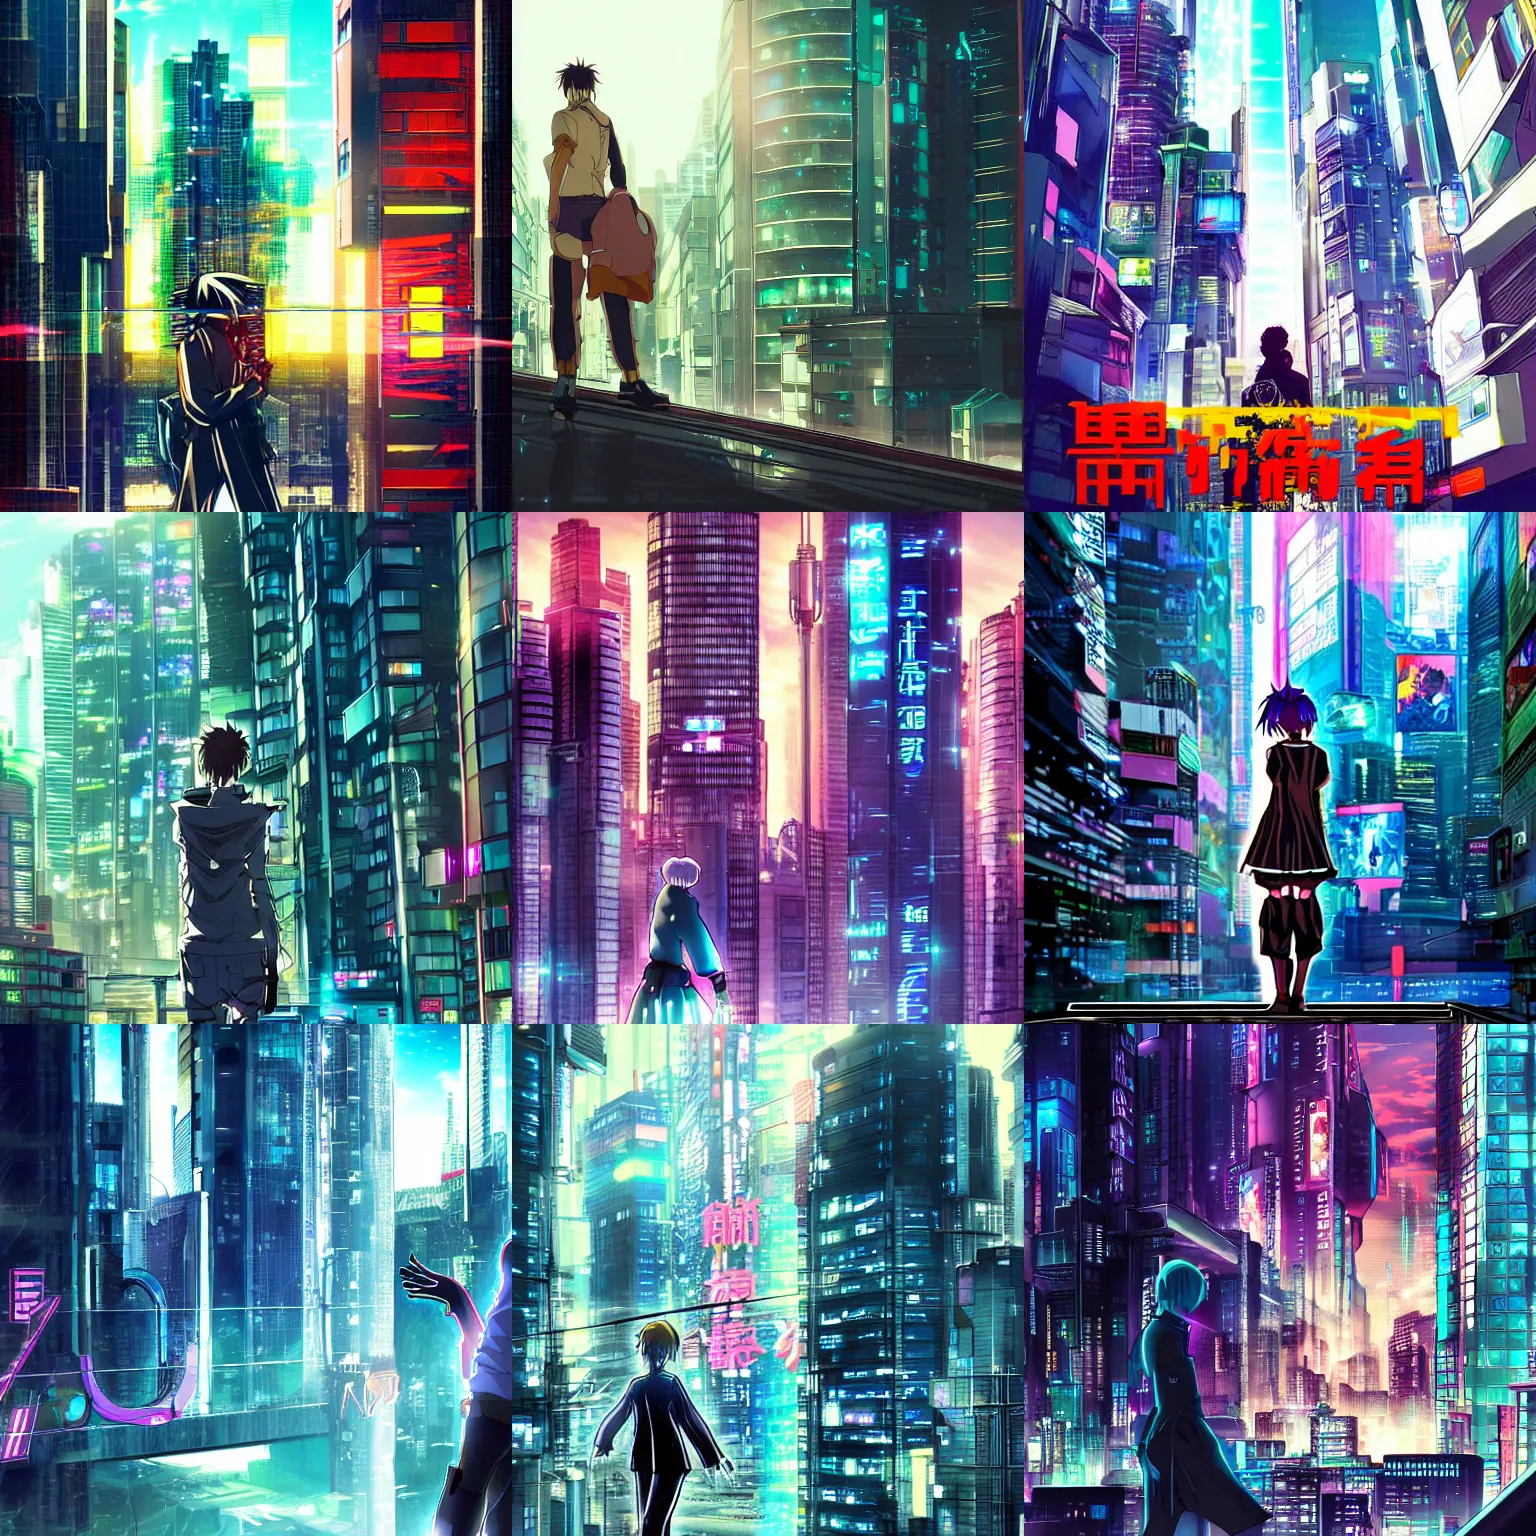 Prompt: anime movie poster of a cyberpunk android falling past a large windowed building that reflects the city around it and the android's reflection